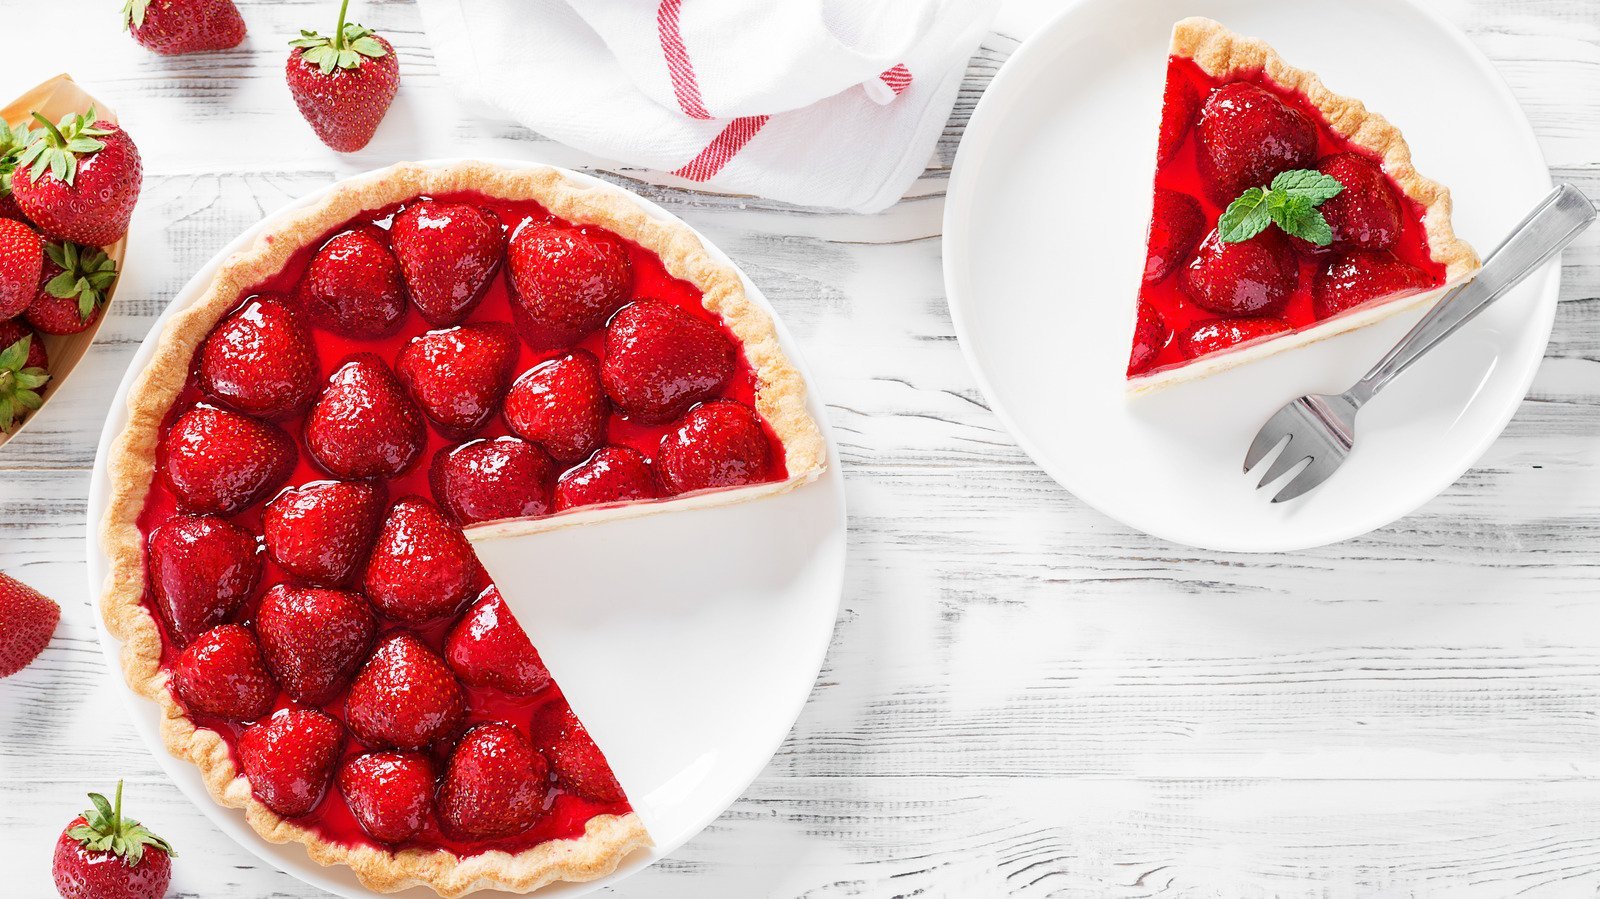 The First Slice Of Pie Will Never Fall Apart Again With This Fancy Trick